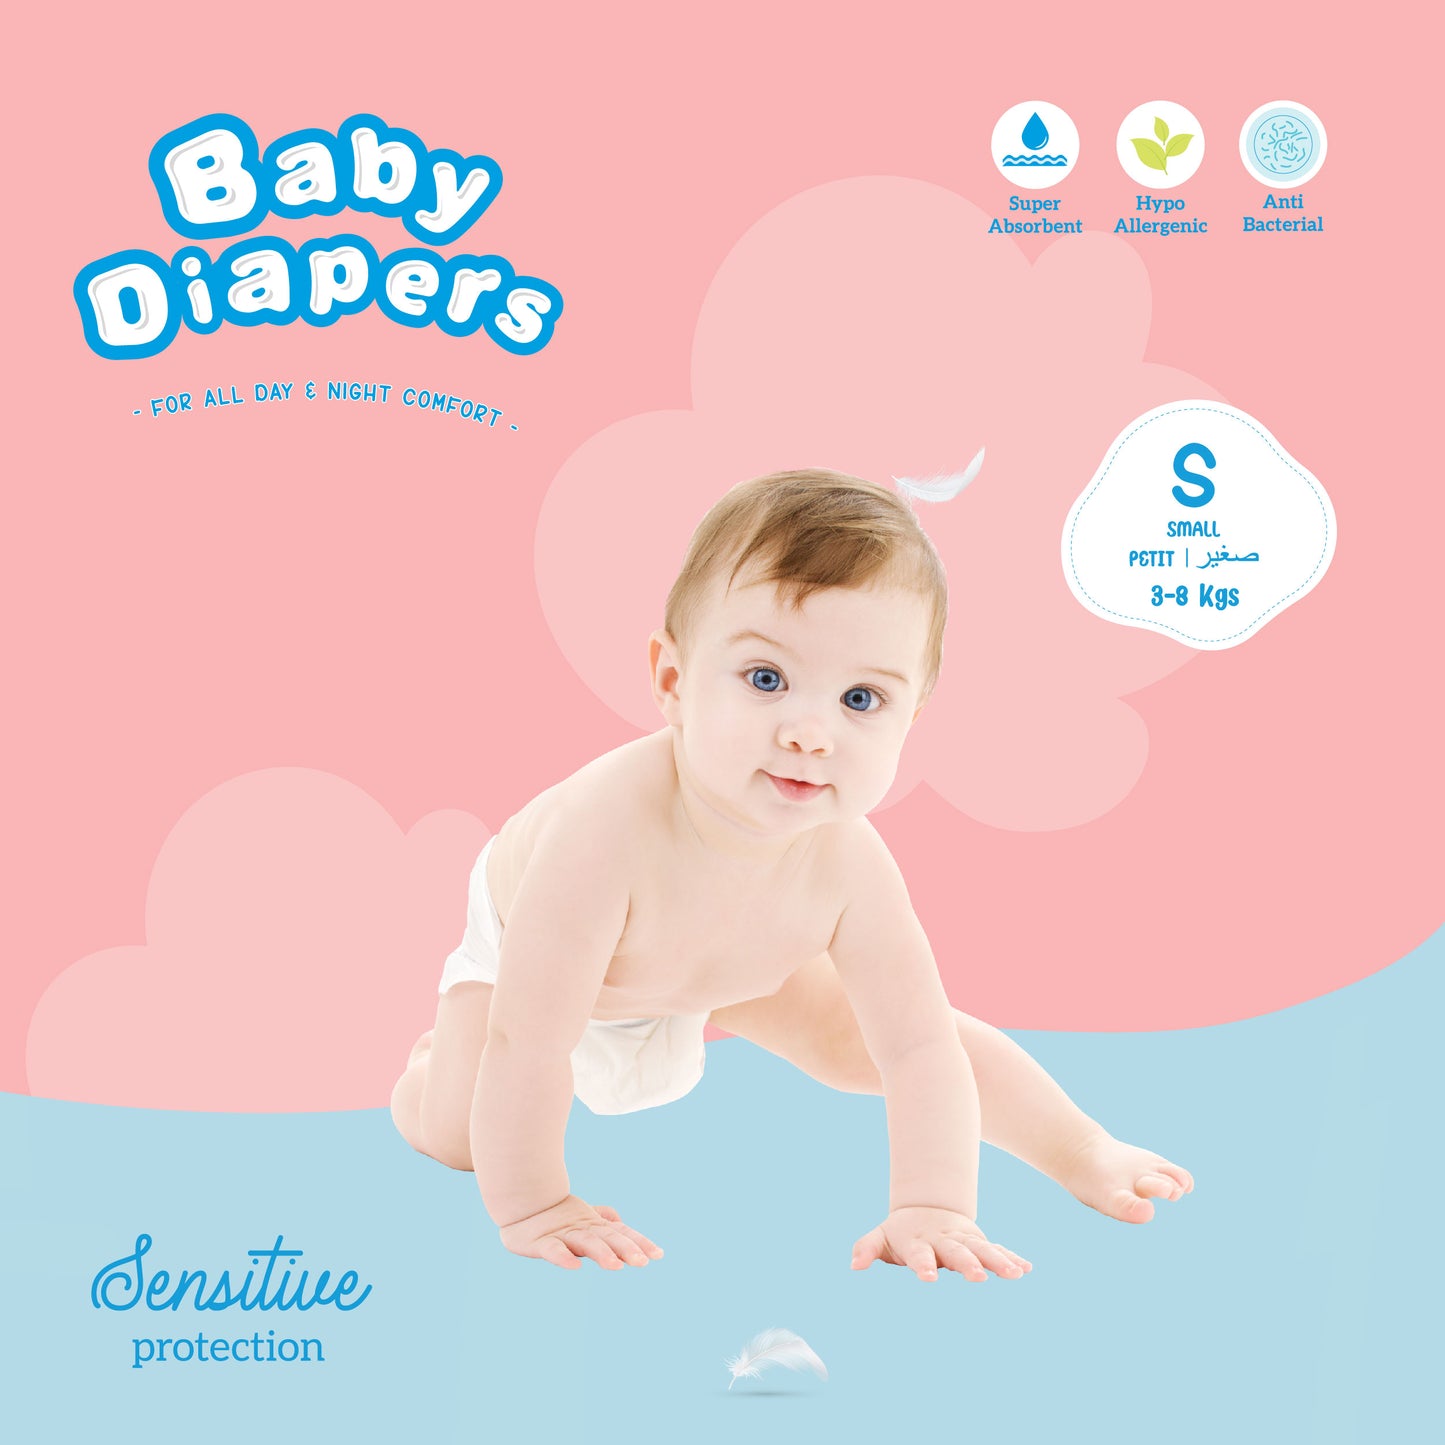 Born Babies Baby Tape Diaper Three Layer Leakage Protection High Absorb (Per Pack 18 Pieces)